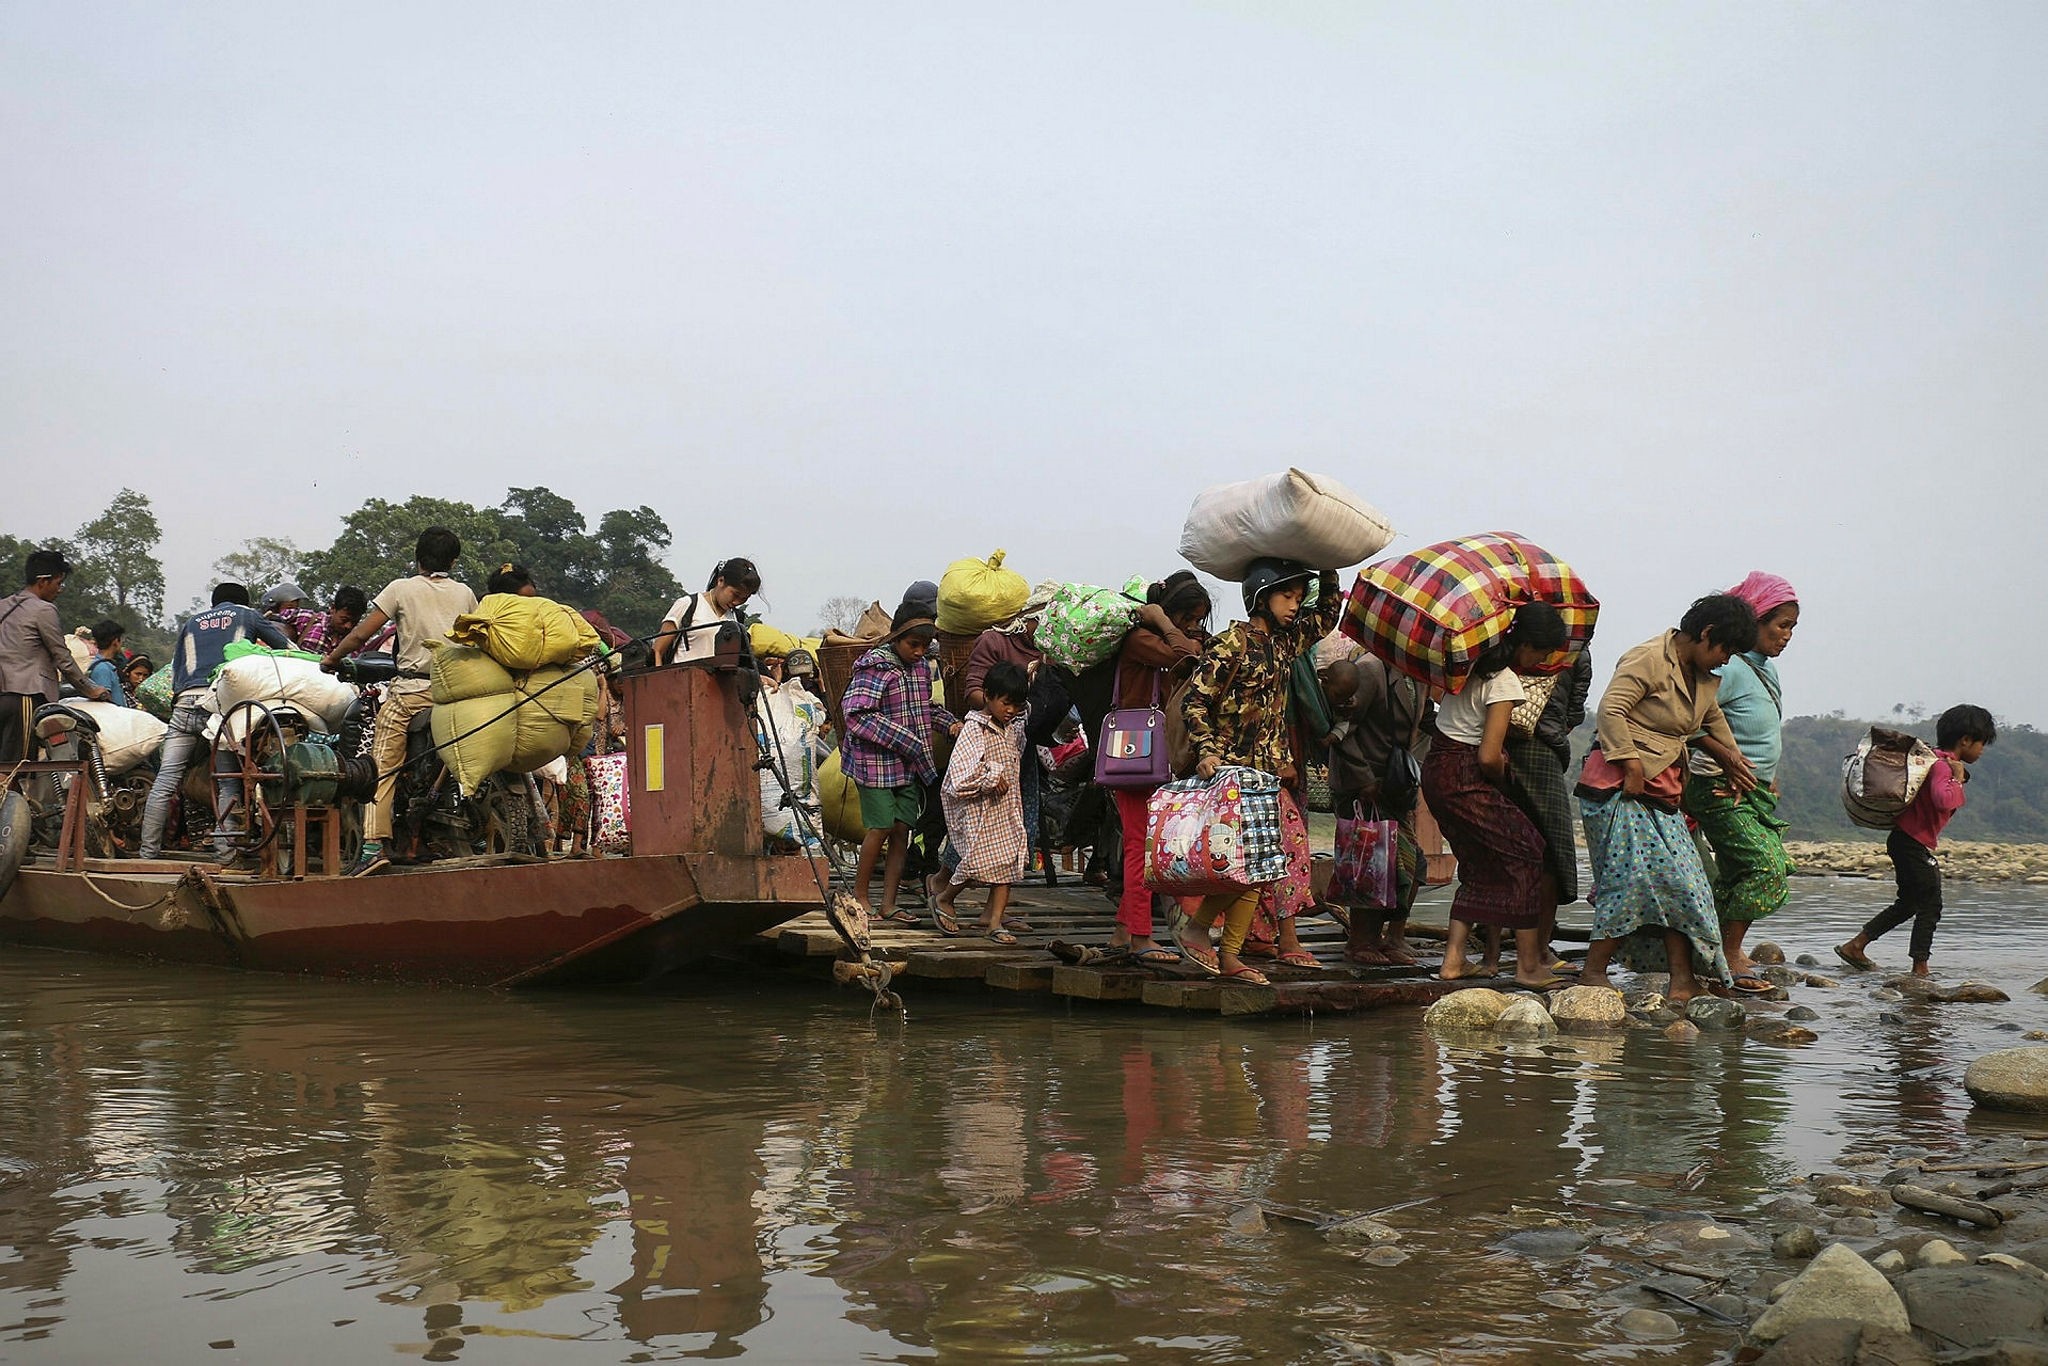 Displaced Kachin residents cross the Malikha river on a ferry to escape Myanmar army atrocities, April 26.